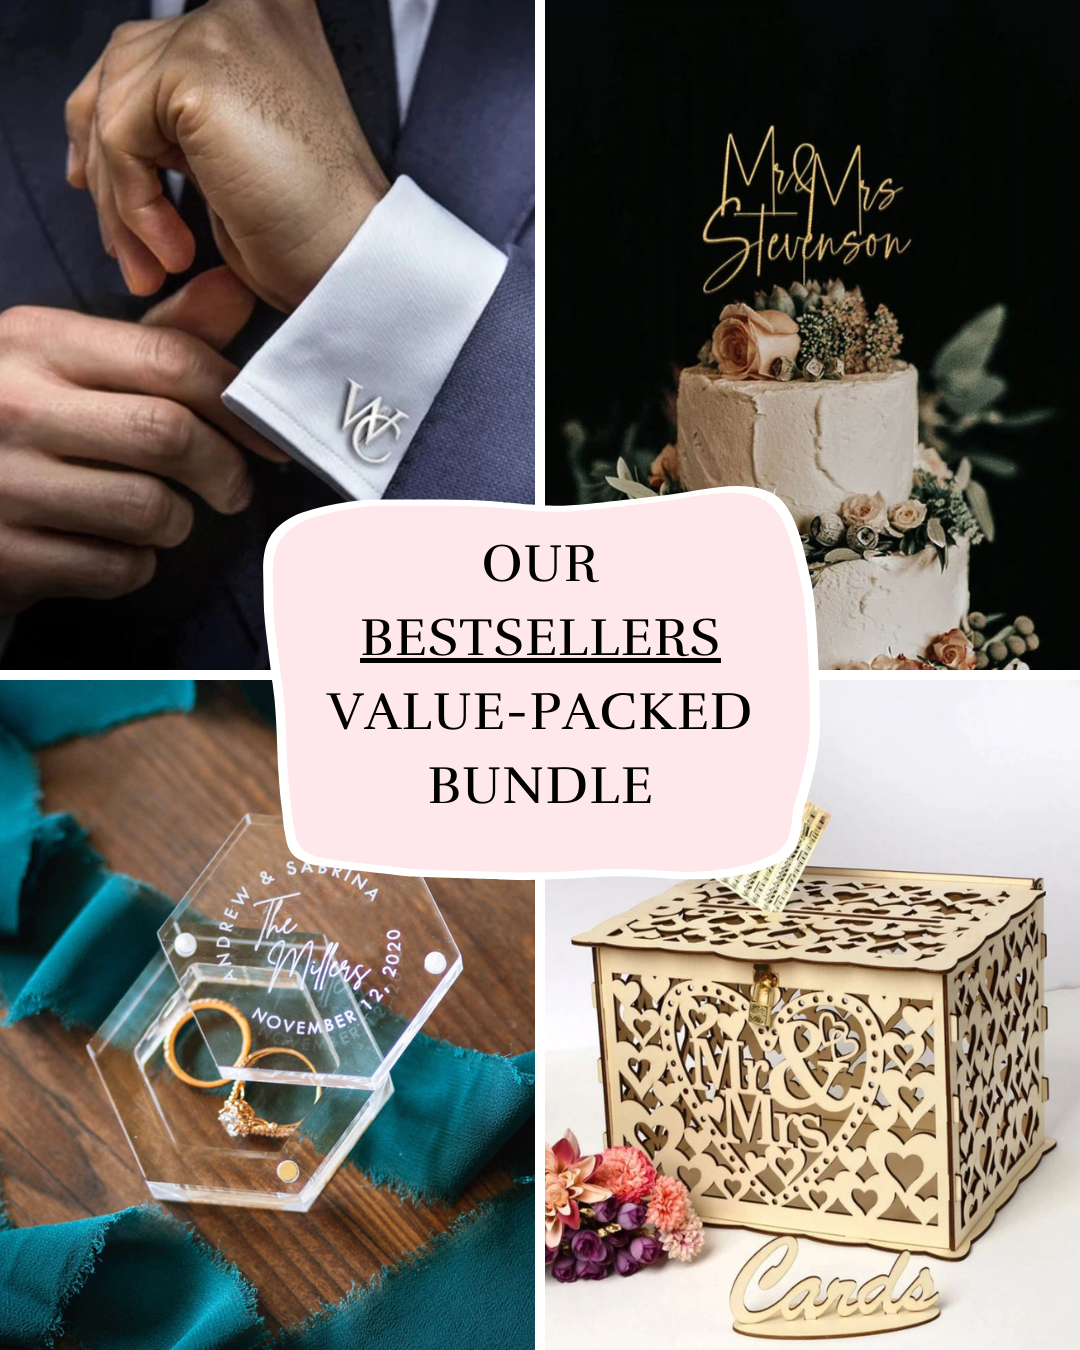 Our Bestsellers Value-Packed Bundle